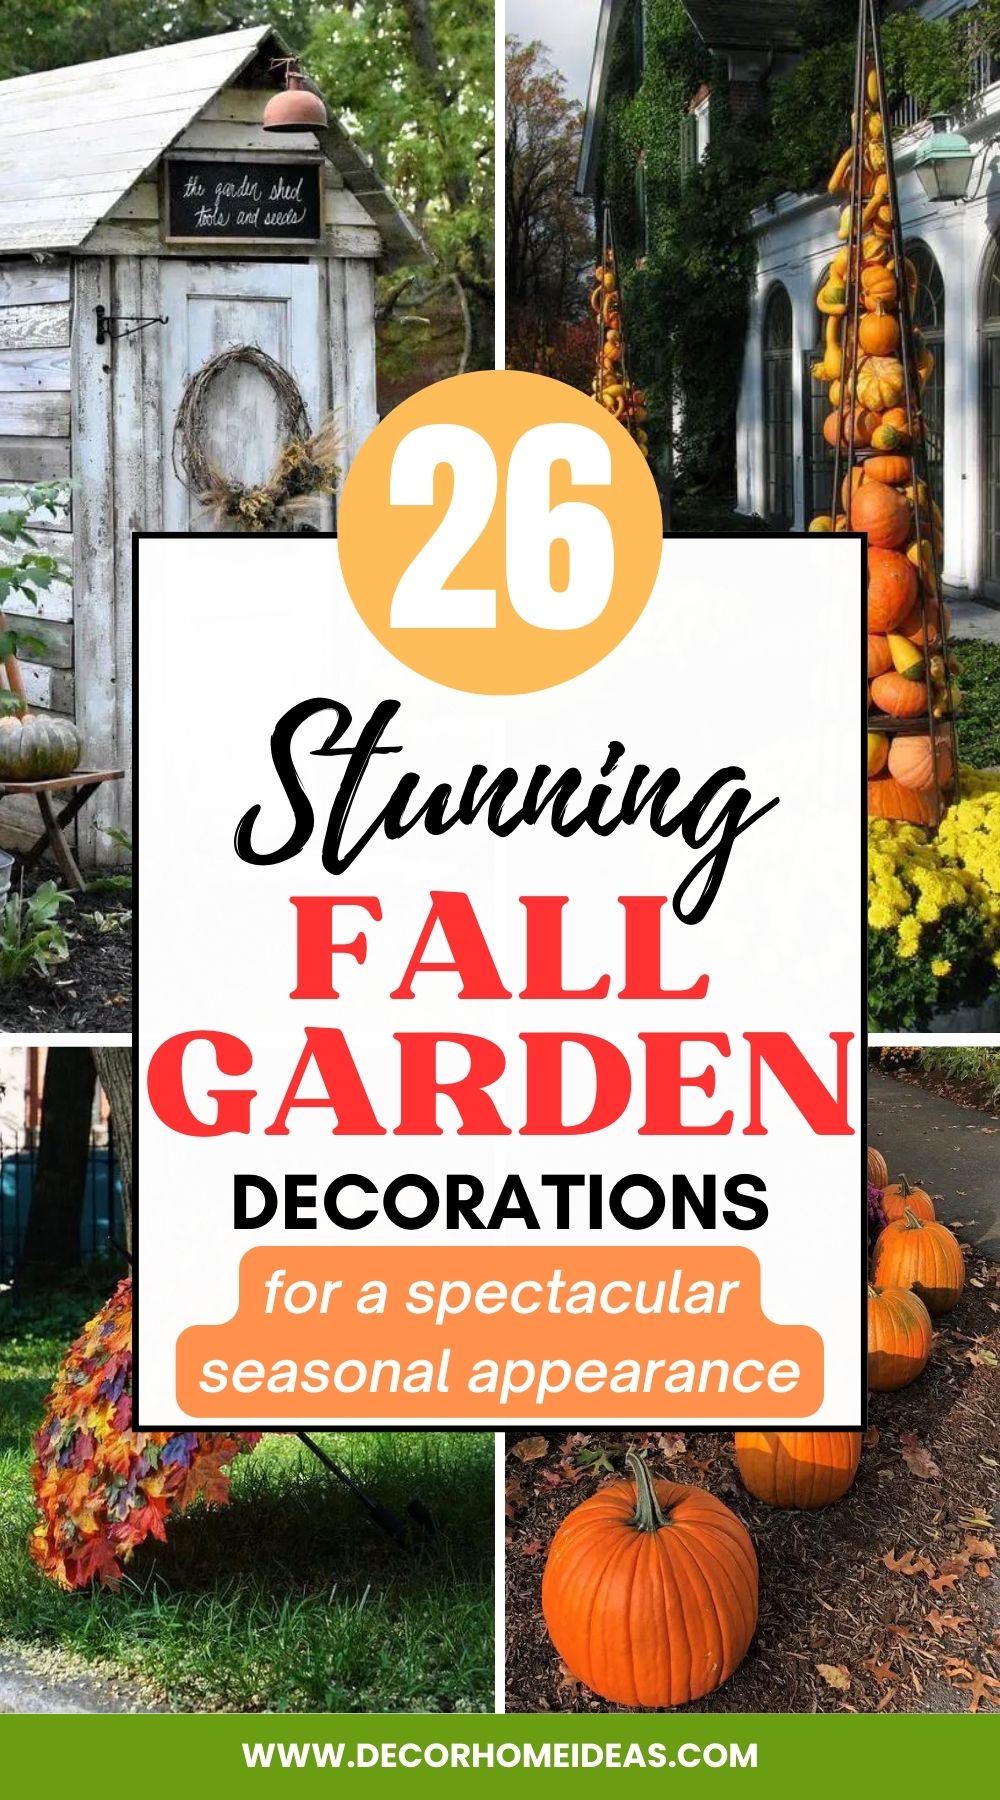 Get inspired to decorate your yard this fall with these 26 stunning fall yard decorations! From pumpkins to scarecrows, find the perfect decorations for your outdoor space.